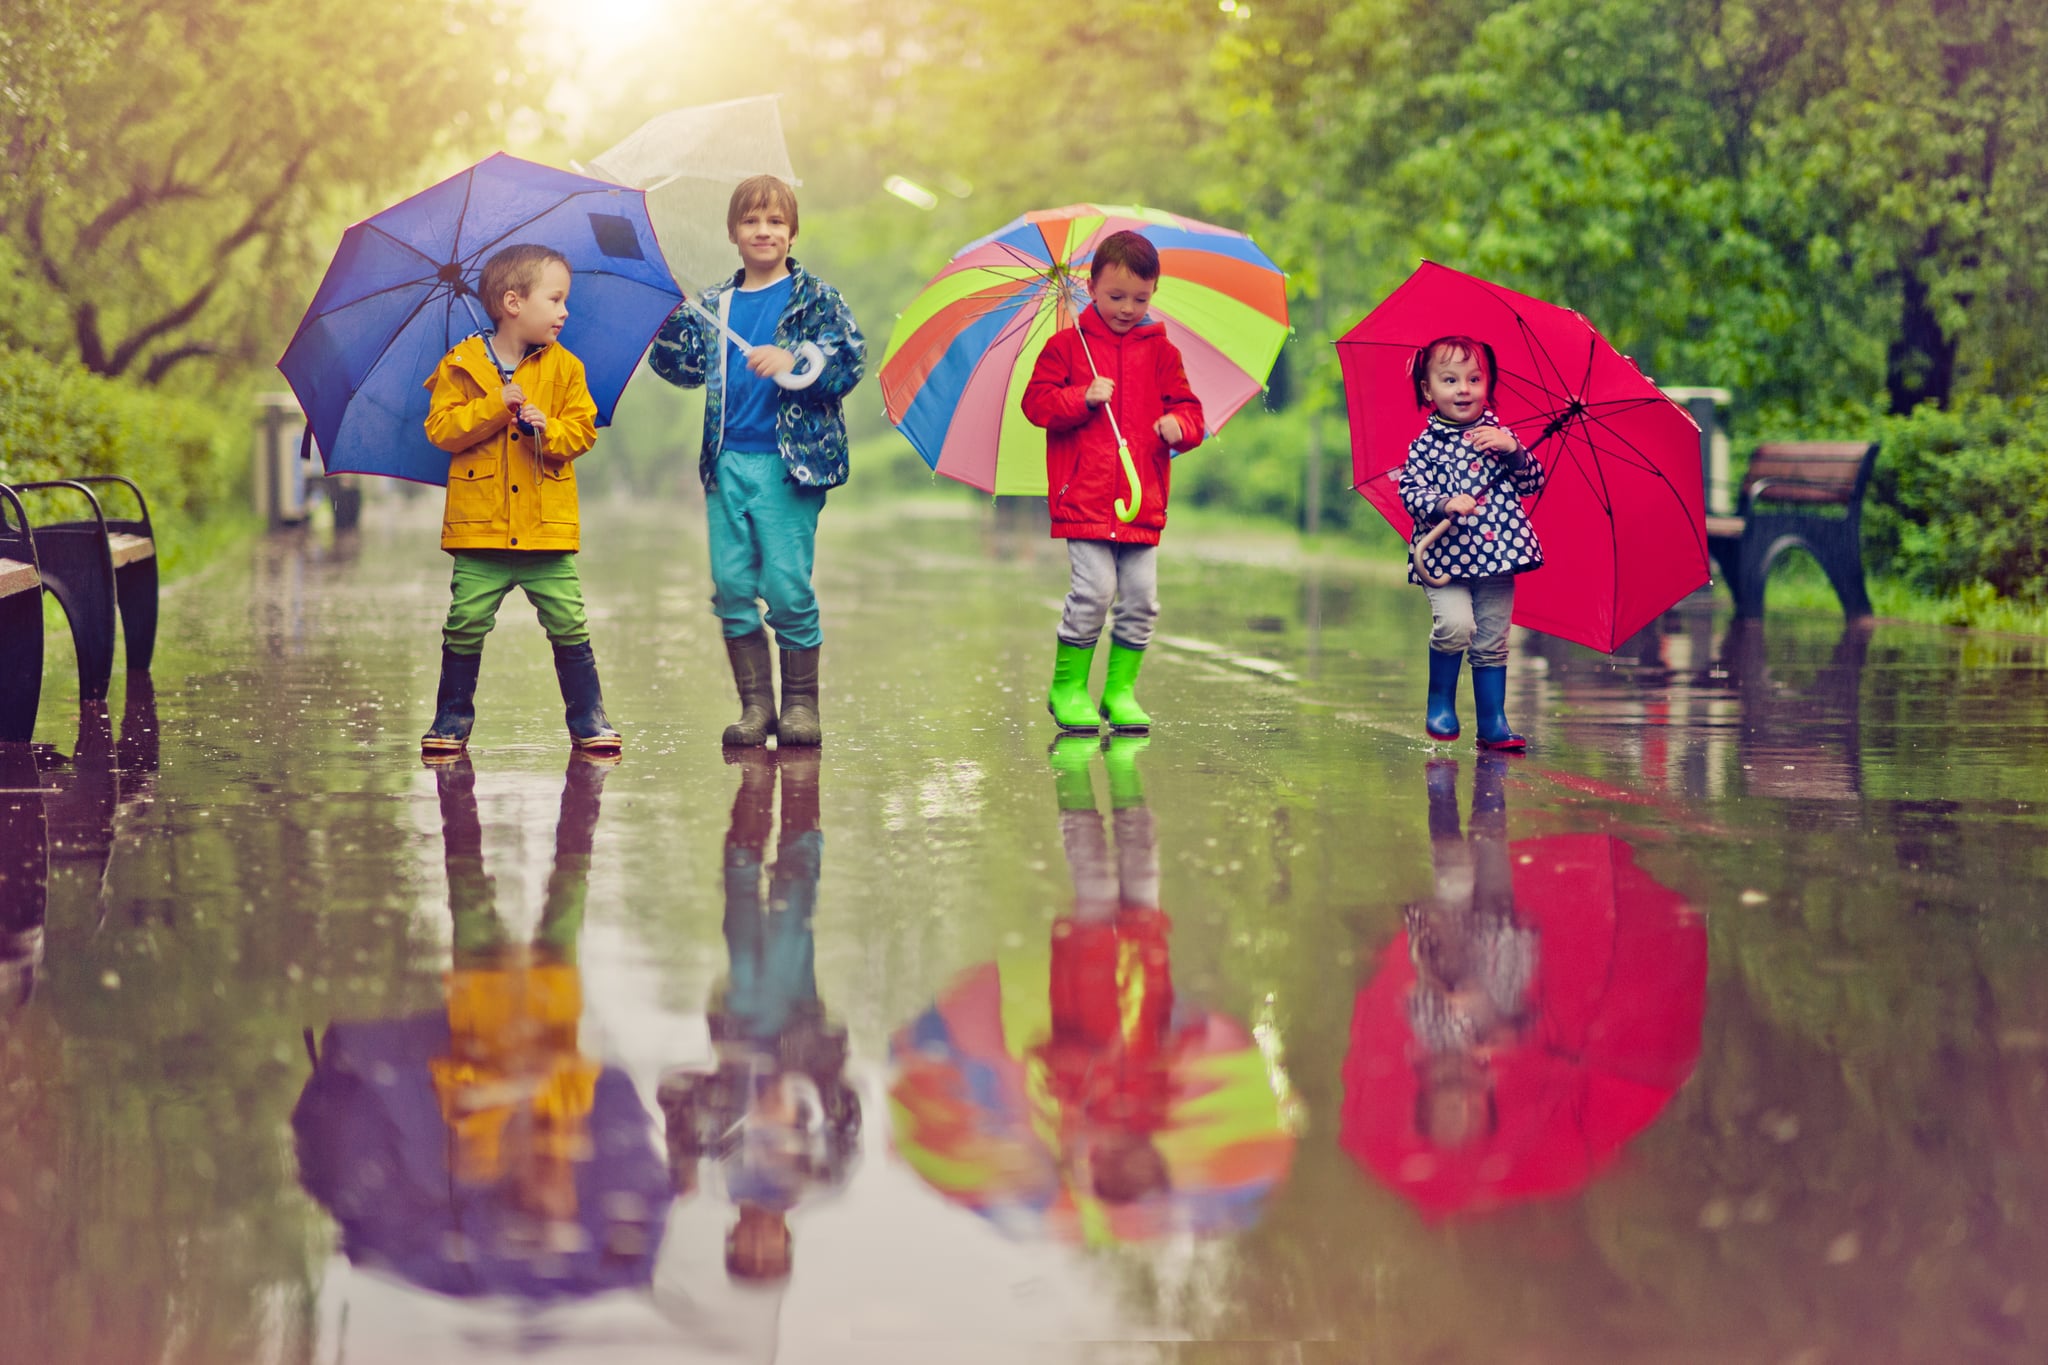 Little boys and girl happily walking under umbrella in park